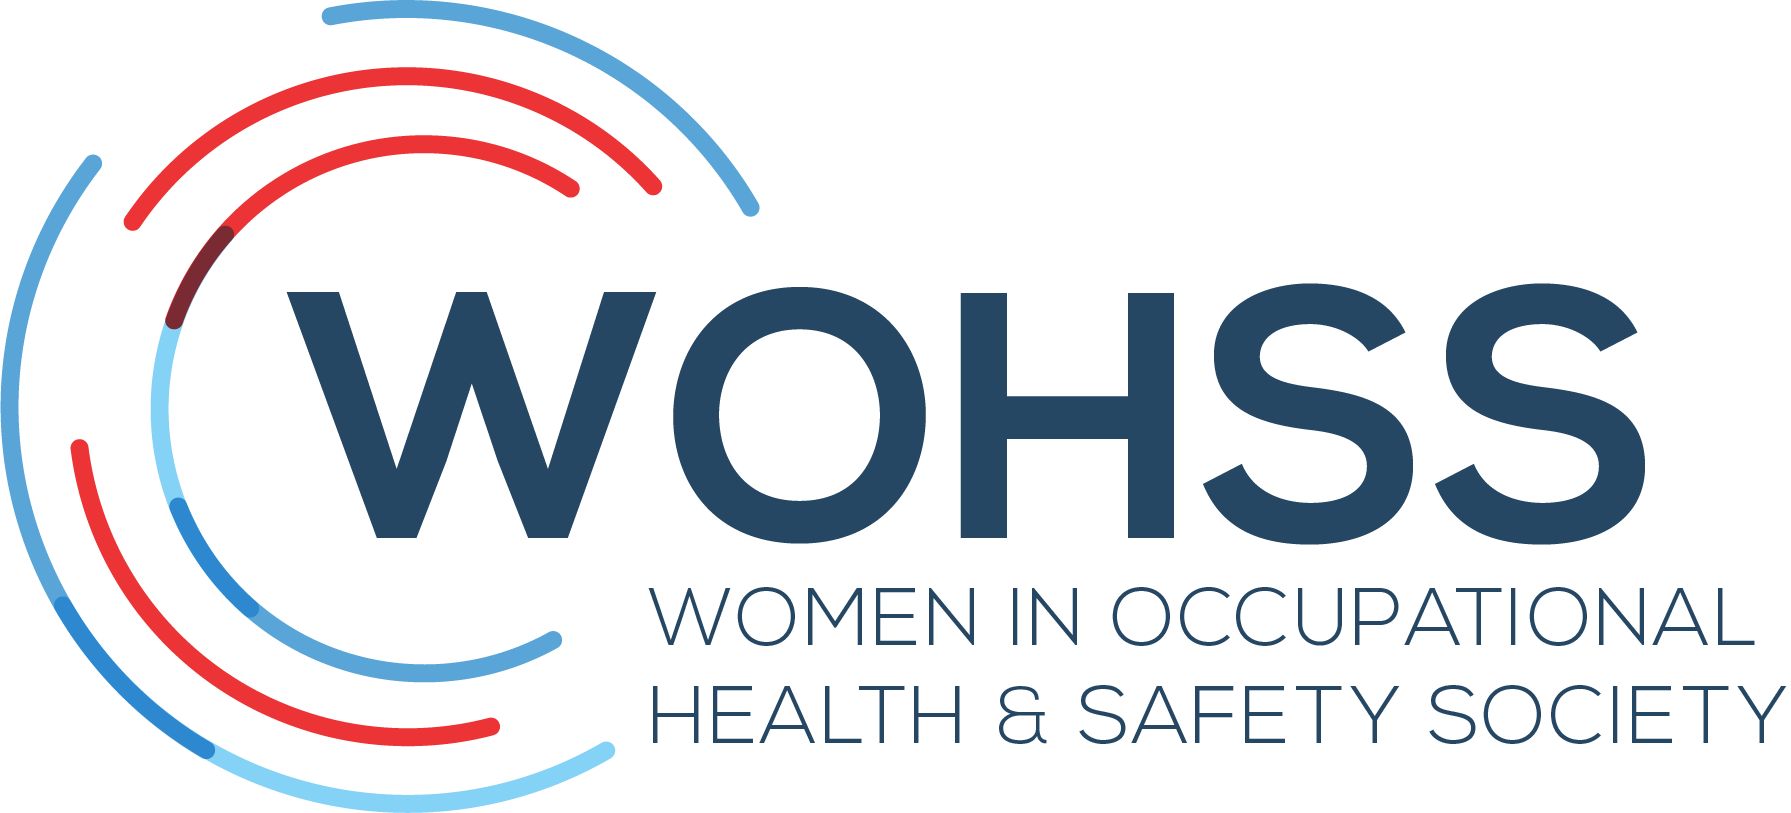 Women in Occupational Health & Safety Society